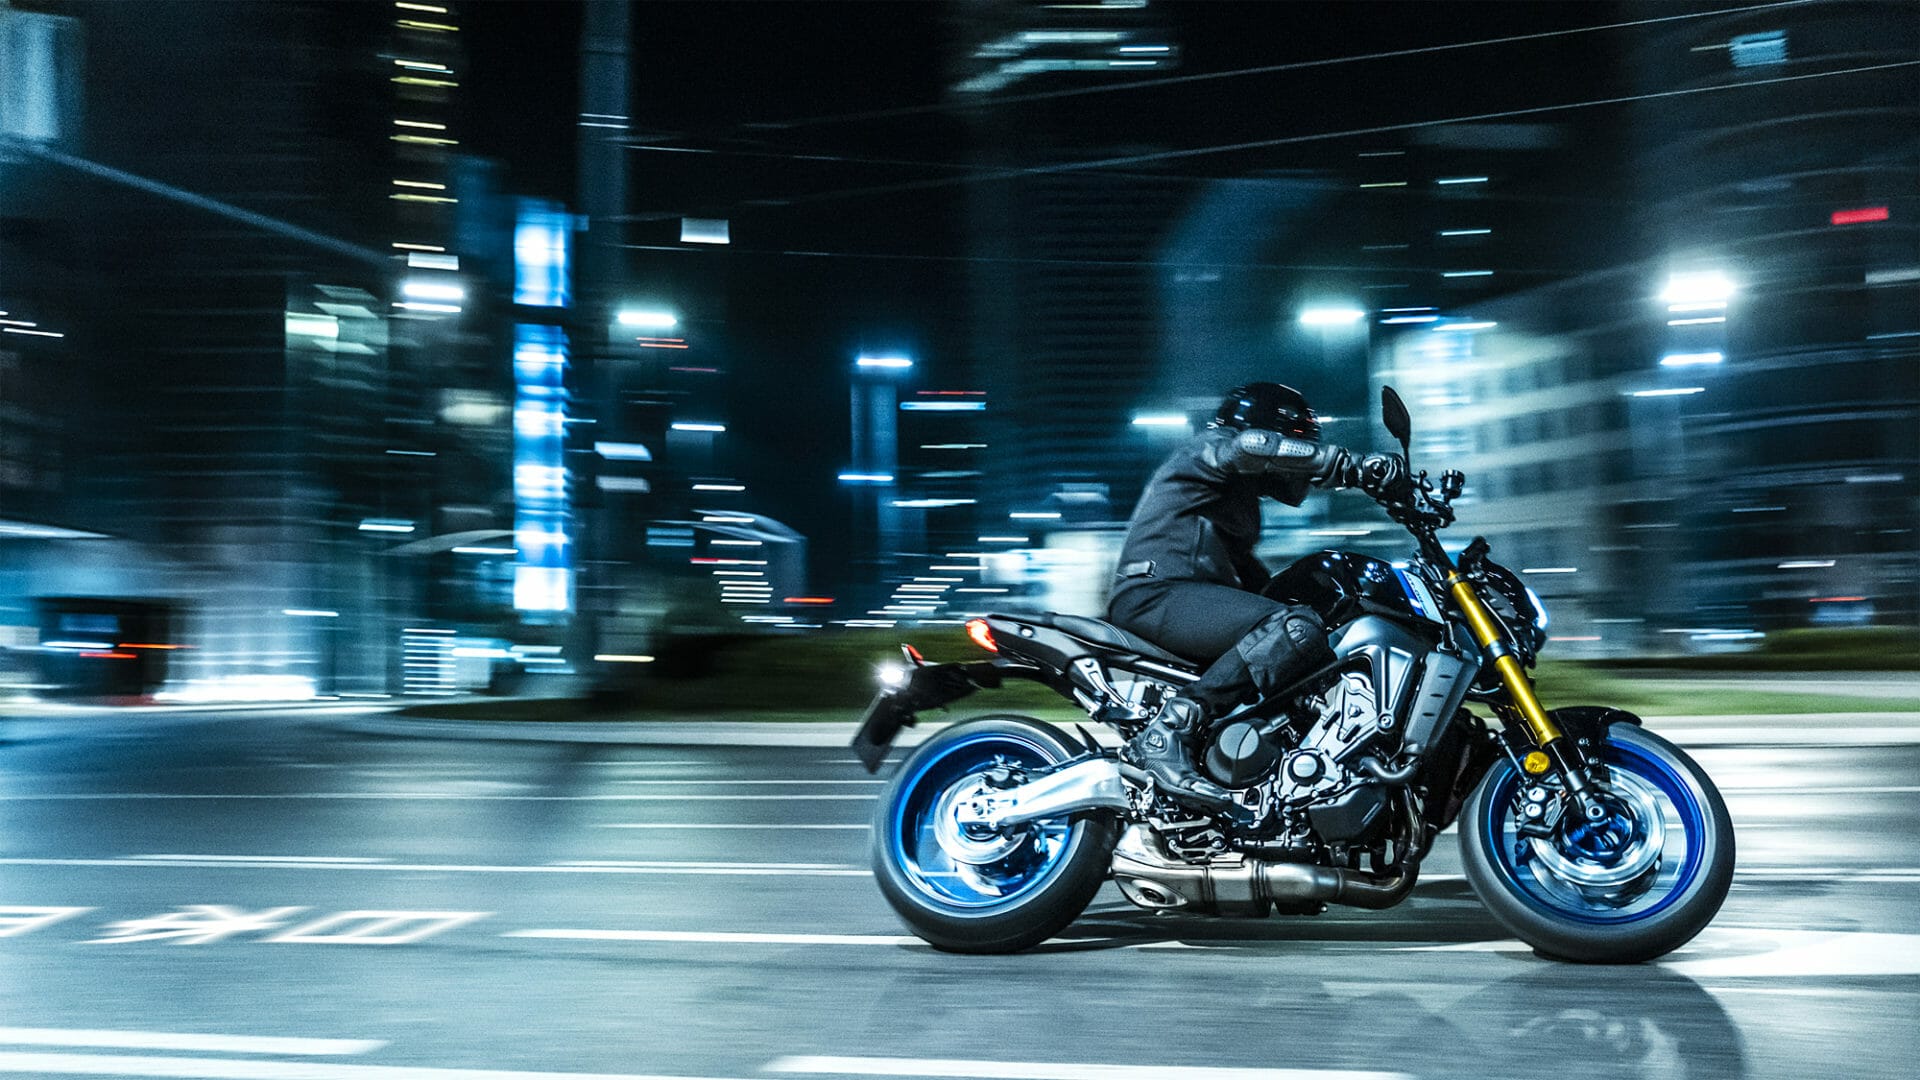 New and radical - Yamaha MT-09 SP
- also in the App MOTORCYCLE NEWS